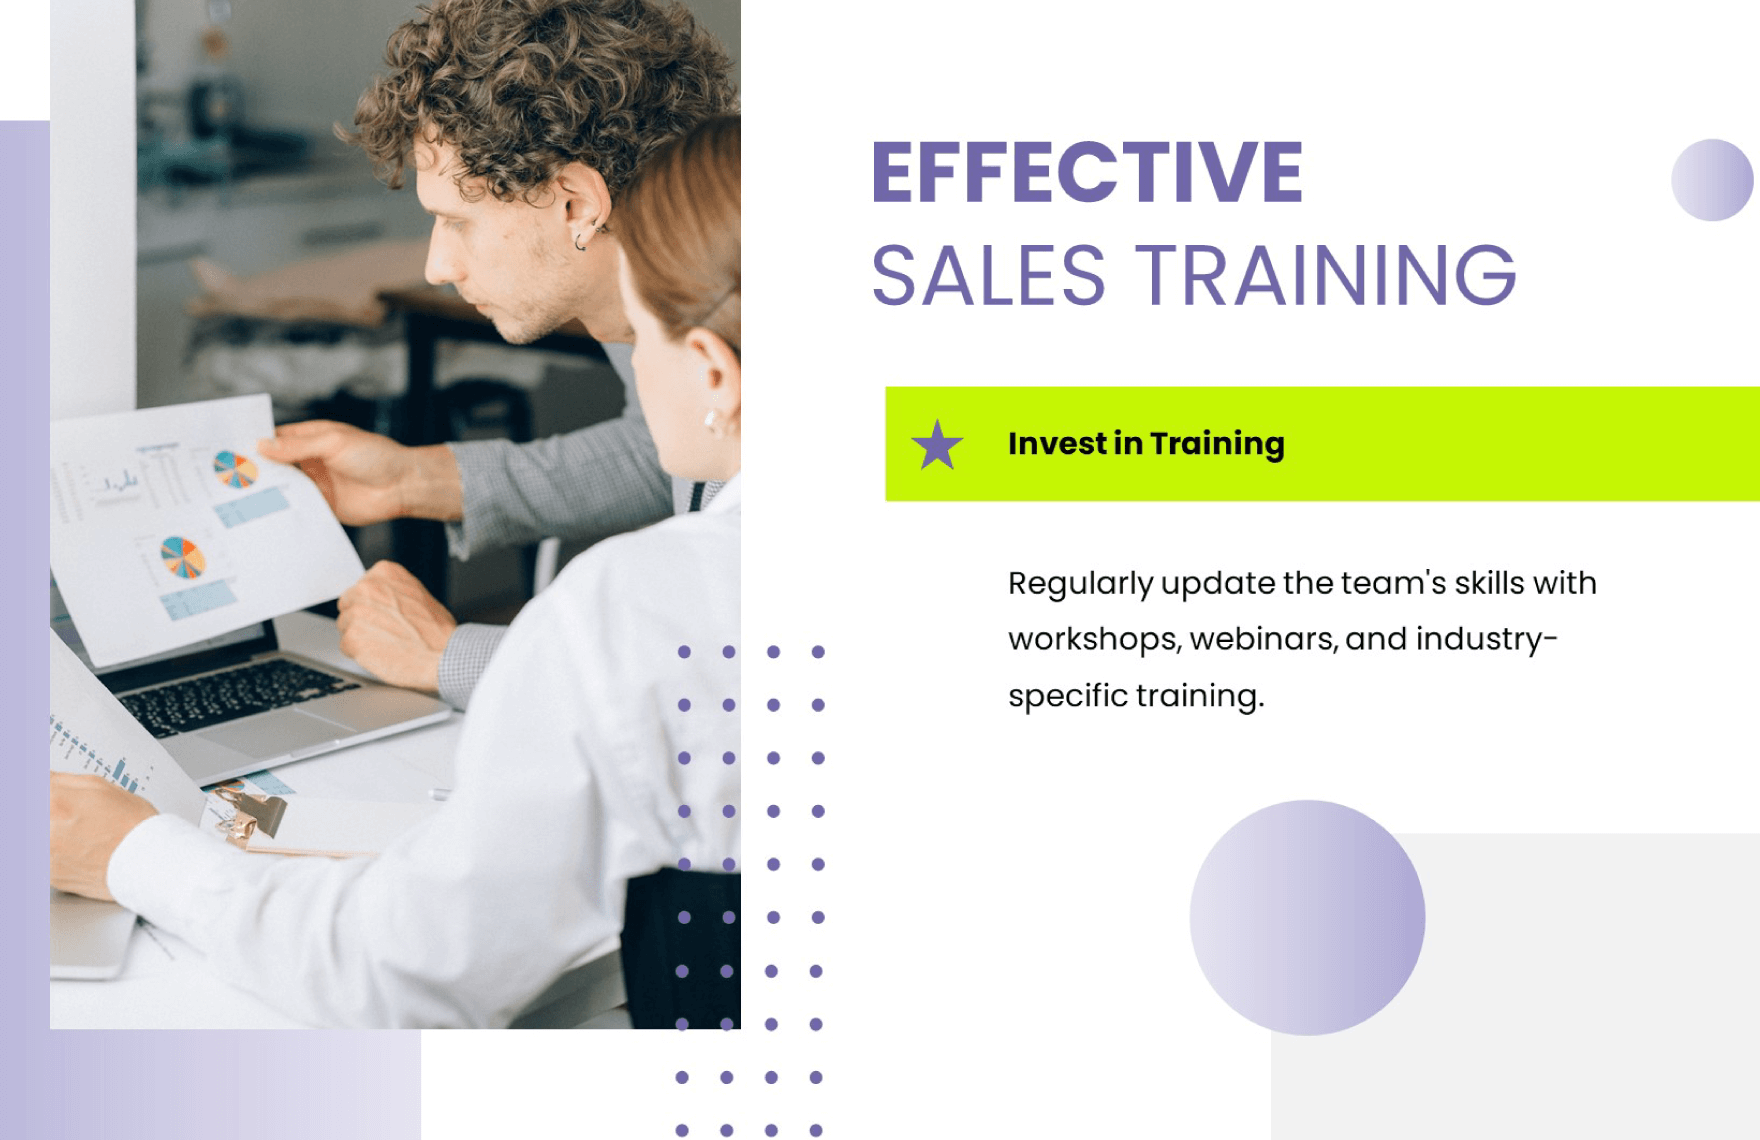 Sales Performance PPT Template